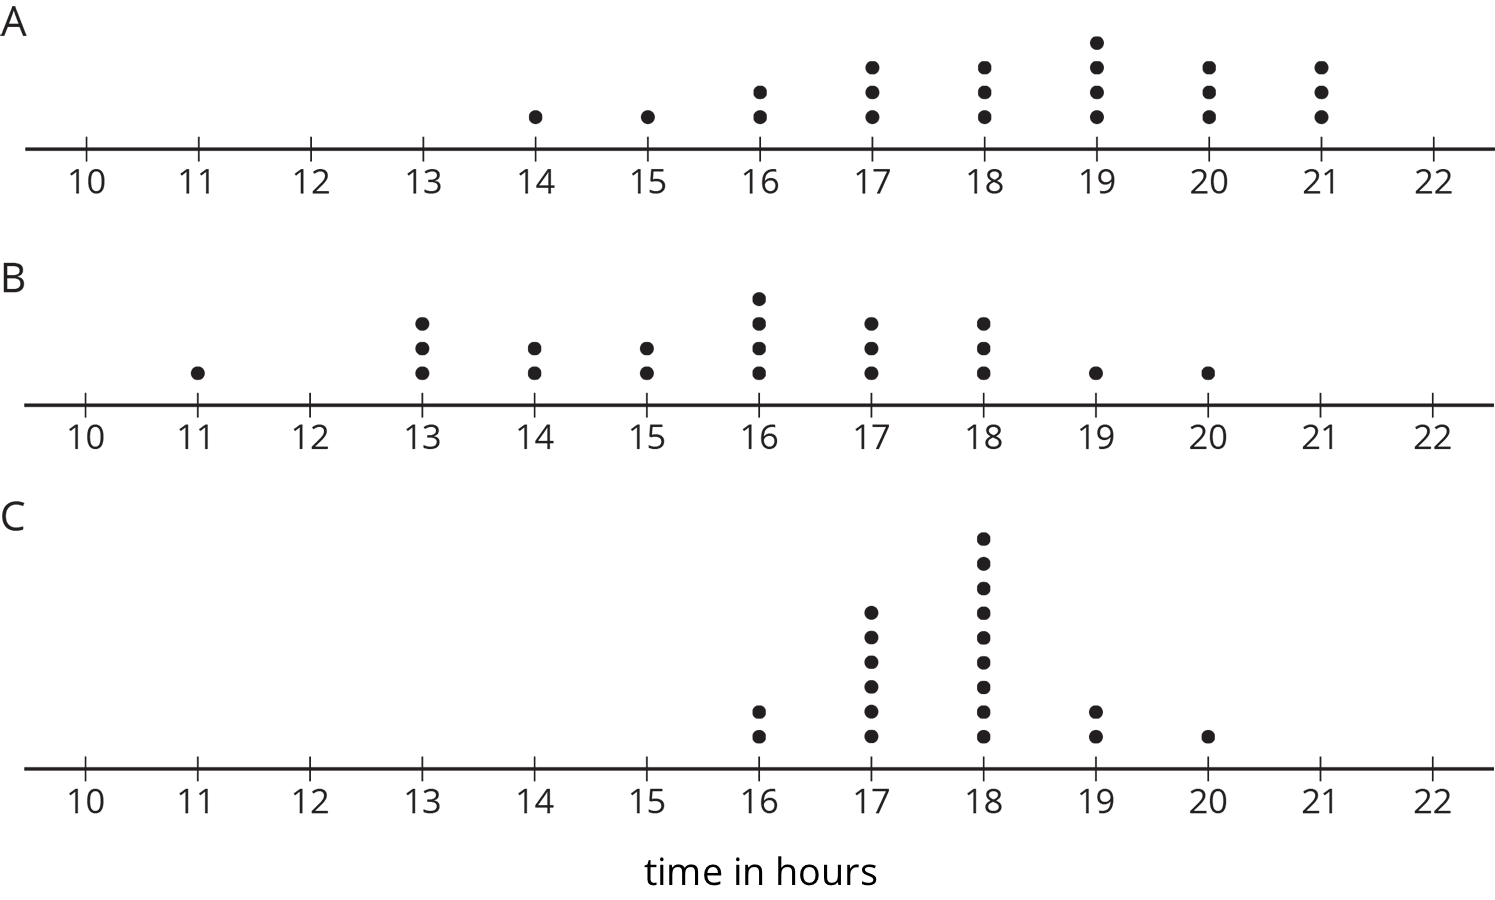 Three dot plots are labeled A, B, and C. Each dot plot has the numbers 10 through 22 indicated.  Dot plot A has the following data:  10 through 13 hours, 0 dots; 14 hours, 1 dot; 15 hours, 1 dot; 16 hours, 2 dots; 17 hours, 3 dots; 18 hours, 3 dots; 19 hours, 4 dots; 20 hours, 3 dots; 21 hours, 3 dots; 22 hours, 0 dots.  Dot plot B has the following data:  10 hours, 0 dots; 11 hours, 1 dot; 12 hours, 0 dots; 13 hours, 3 dots; 14 hours, 2 dots; 15 hours, 2 dots; 16 hours, 4 dots; 17 hours, 3 dots; 18 hours, 3 dots; 19 hours, 1 dot; 20 hours, 1 dot; 21 hours, 0 dots; 22 hours, 0 dots.  Dot plot C has the following data:  10 through 15 hours, 0 dots; 16 hours, 2 dots; 17 hours, 6 dots; 18 hours, 9 dots; 19 hours, 2 dot; 20 hours, 1 dot; 21 hours, 0 dots; 22 hours, 0 dots.